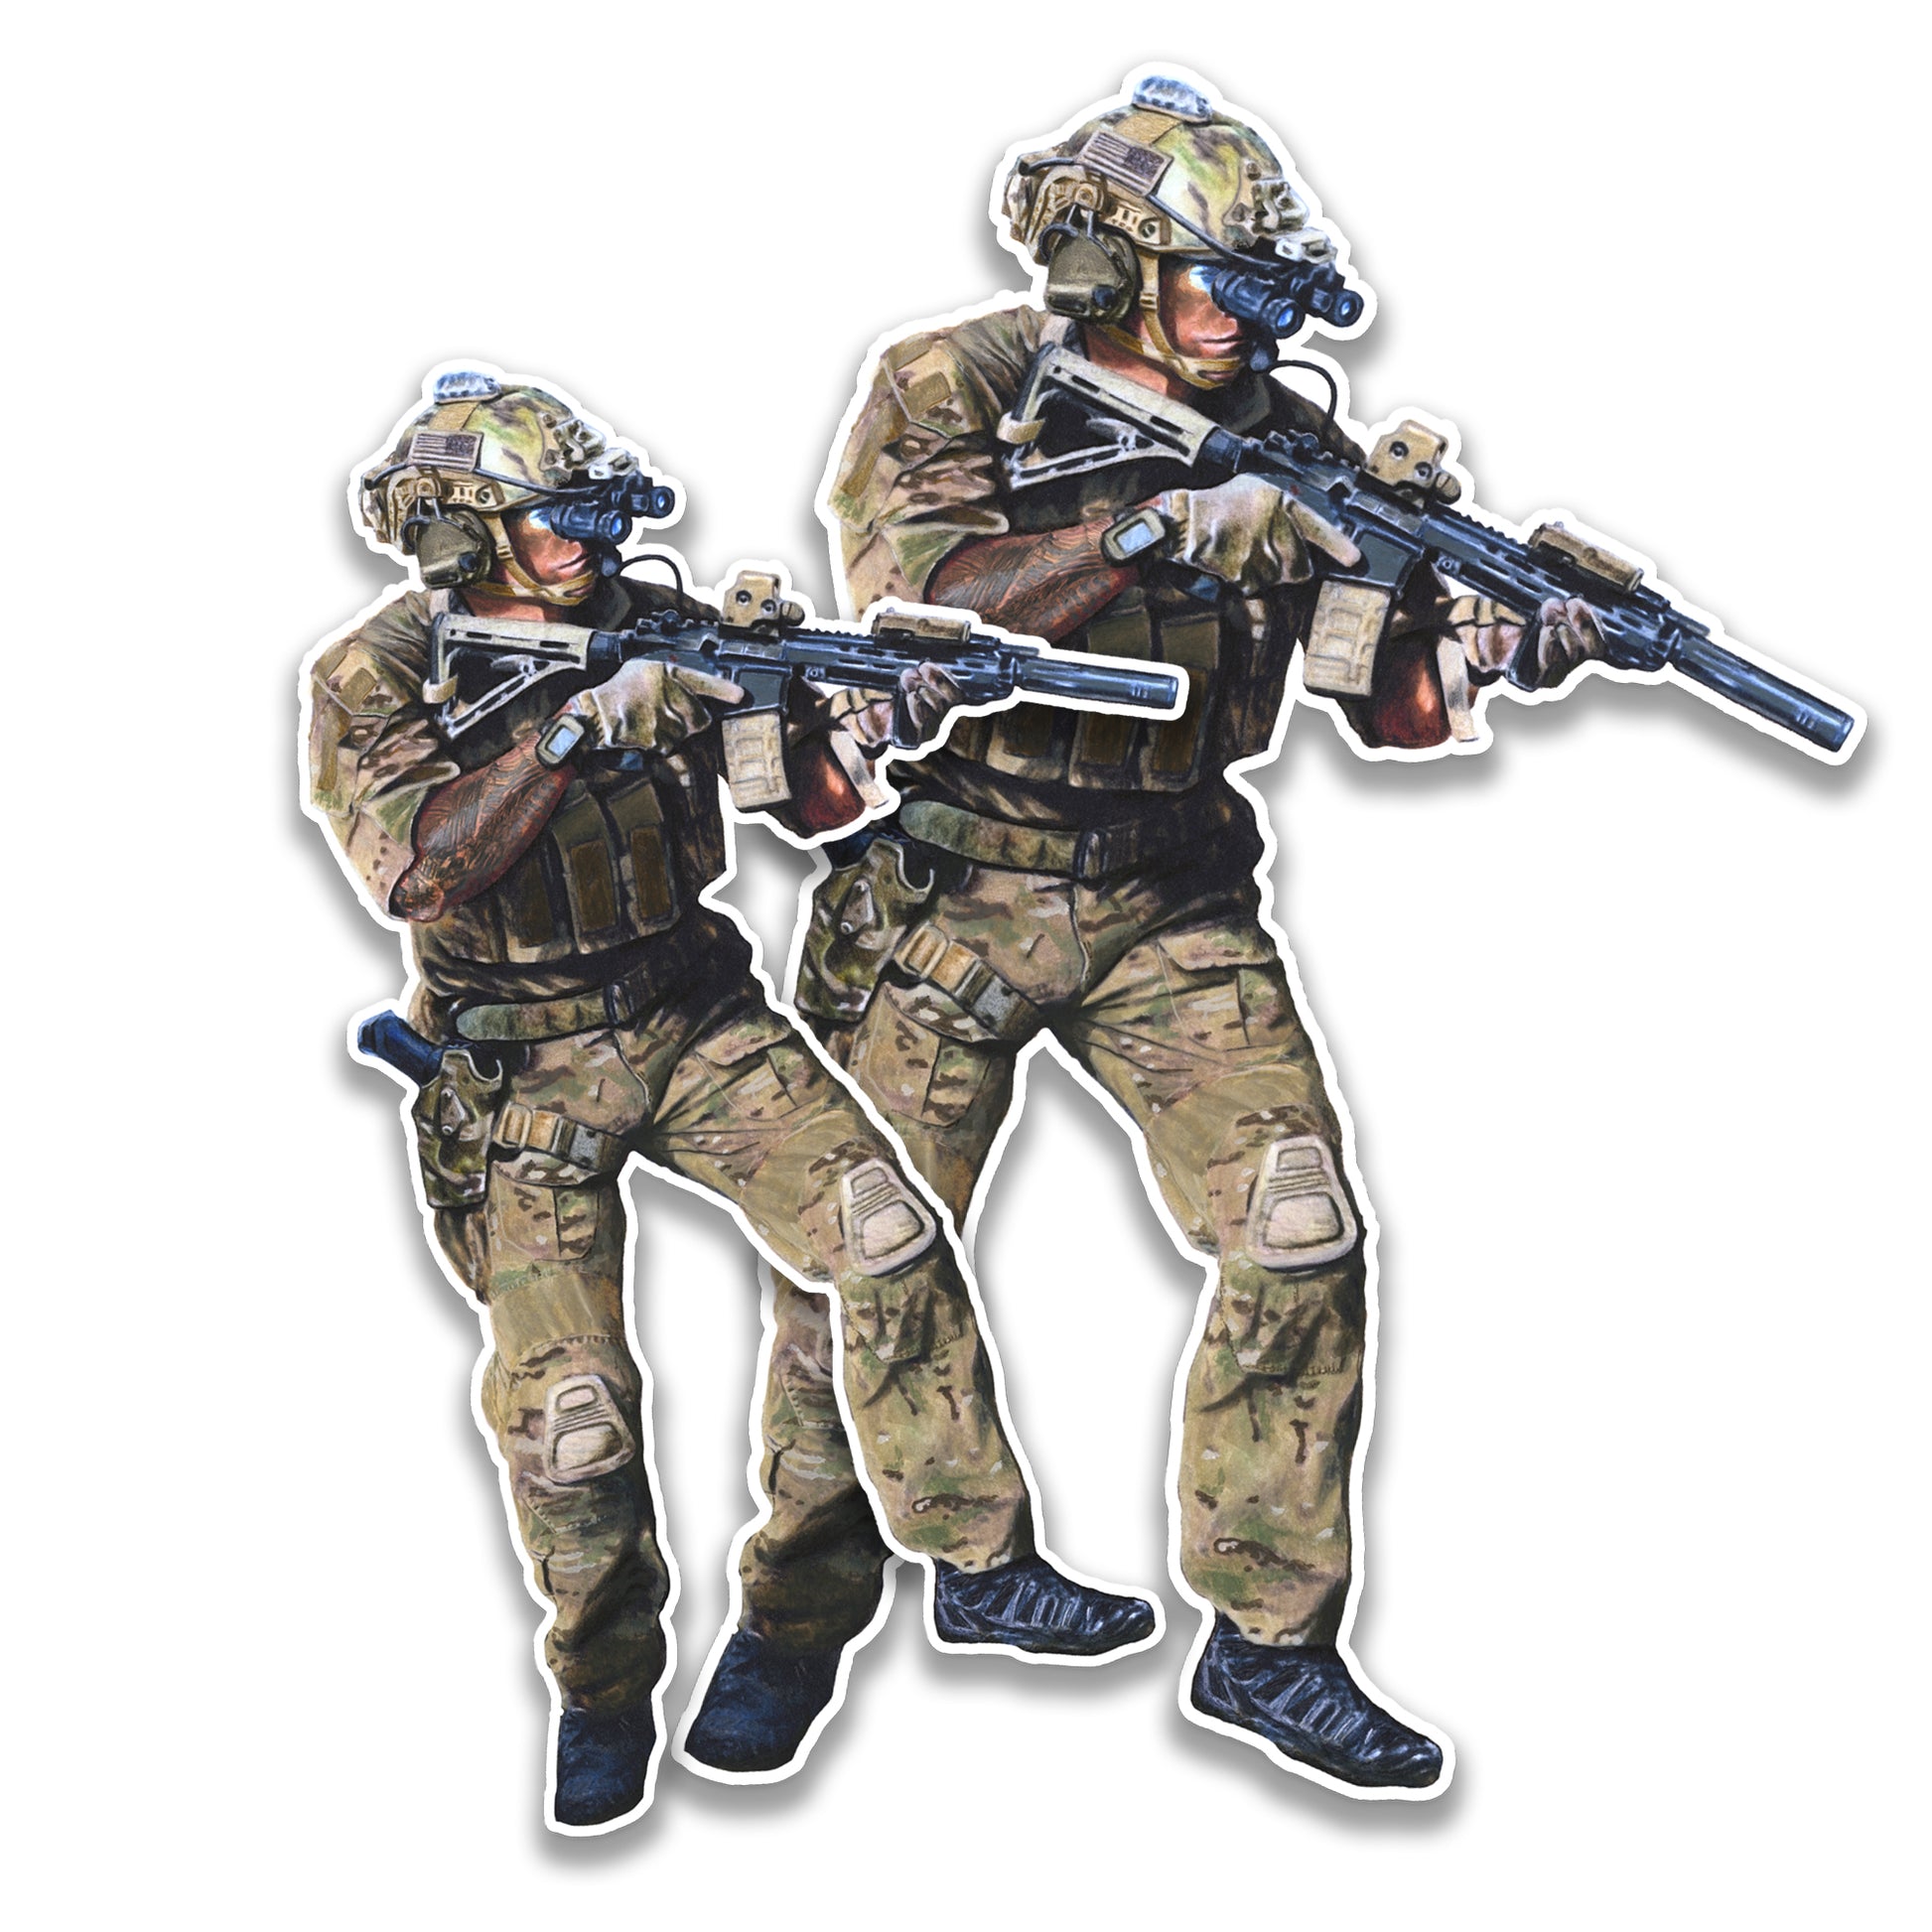 Army Special Forces (Commandos) – Prairie Fire Art